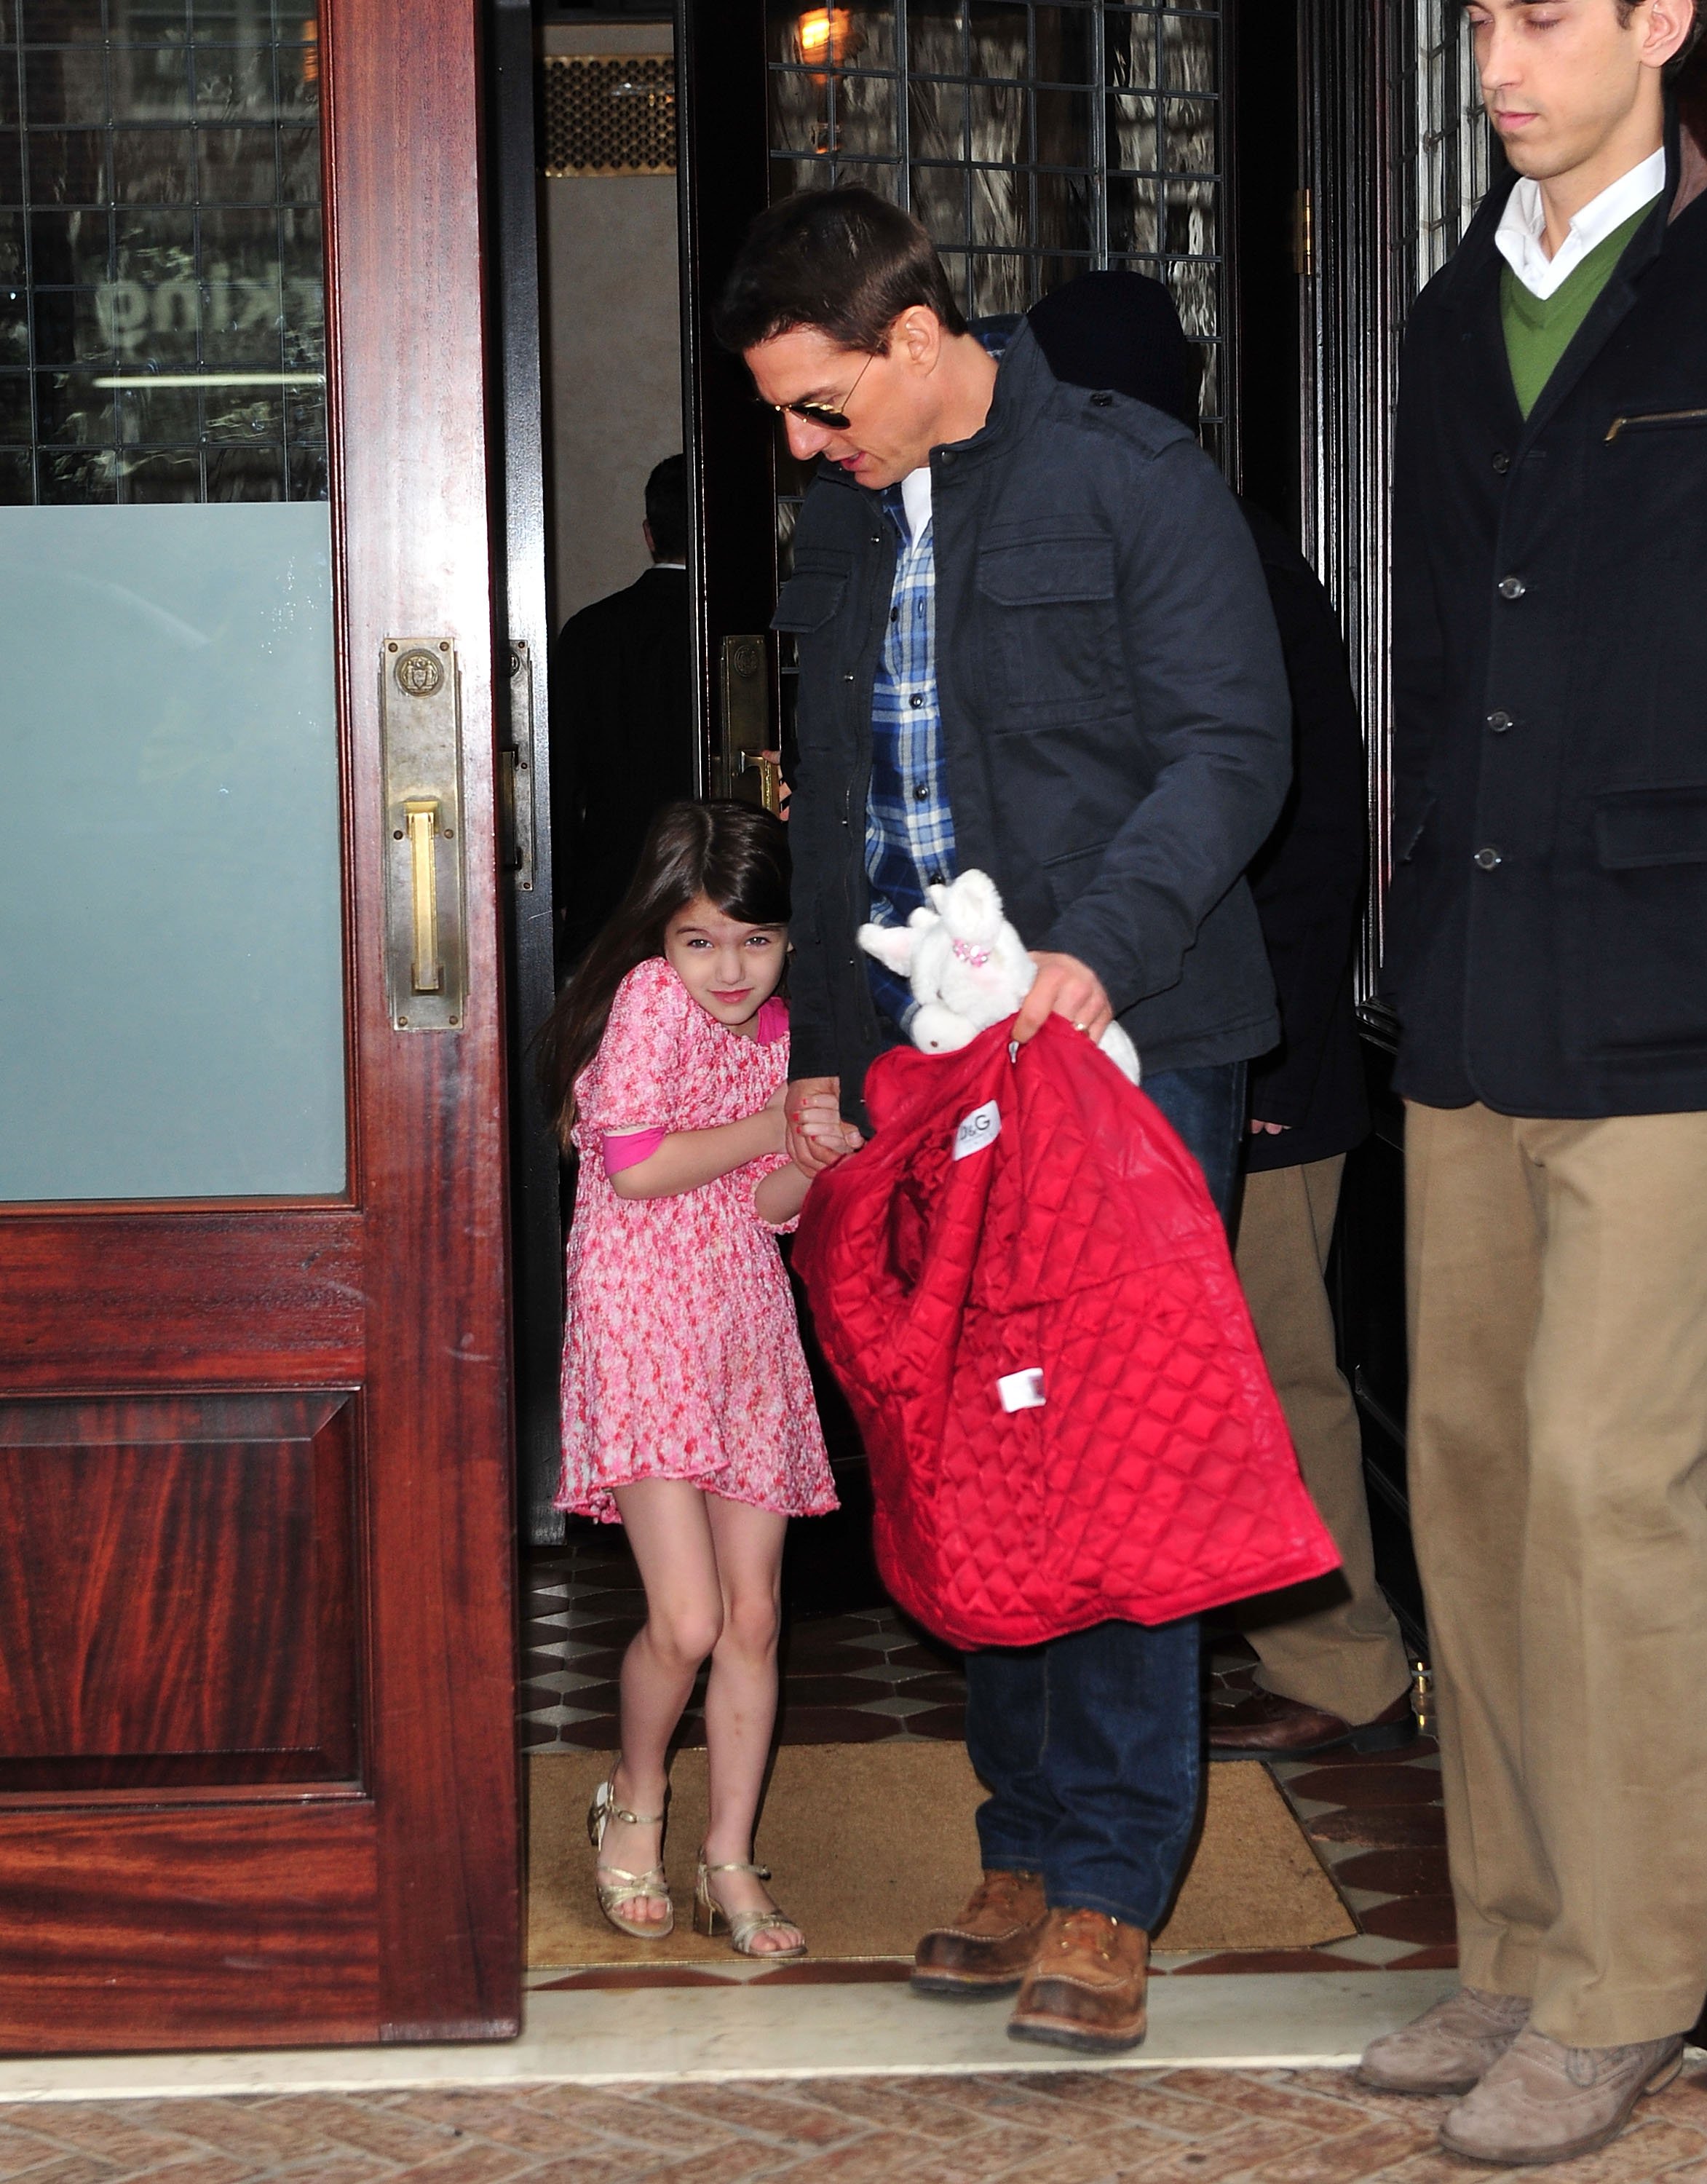 Tom Cruise and Suri Cruise seen on the streets of Manhattan on December 16, 2011 in New York City. | Source: Getty Images